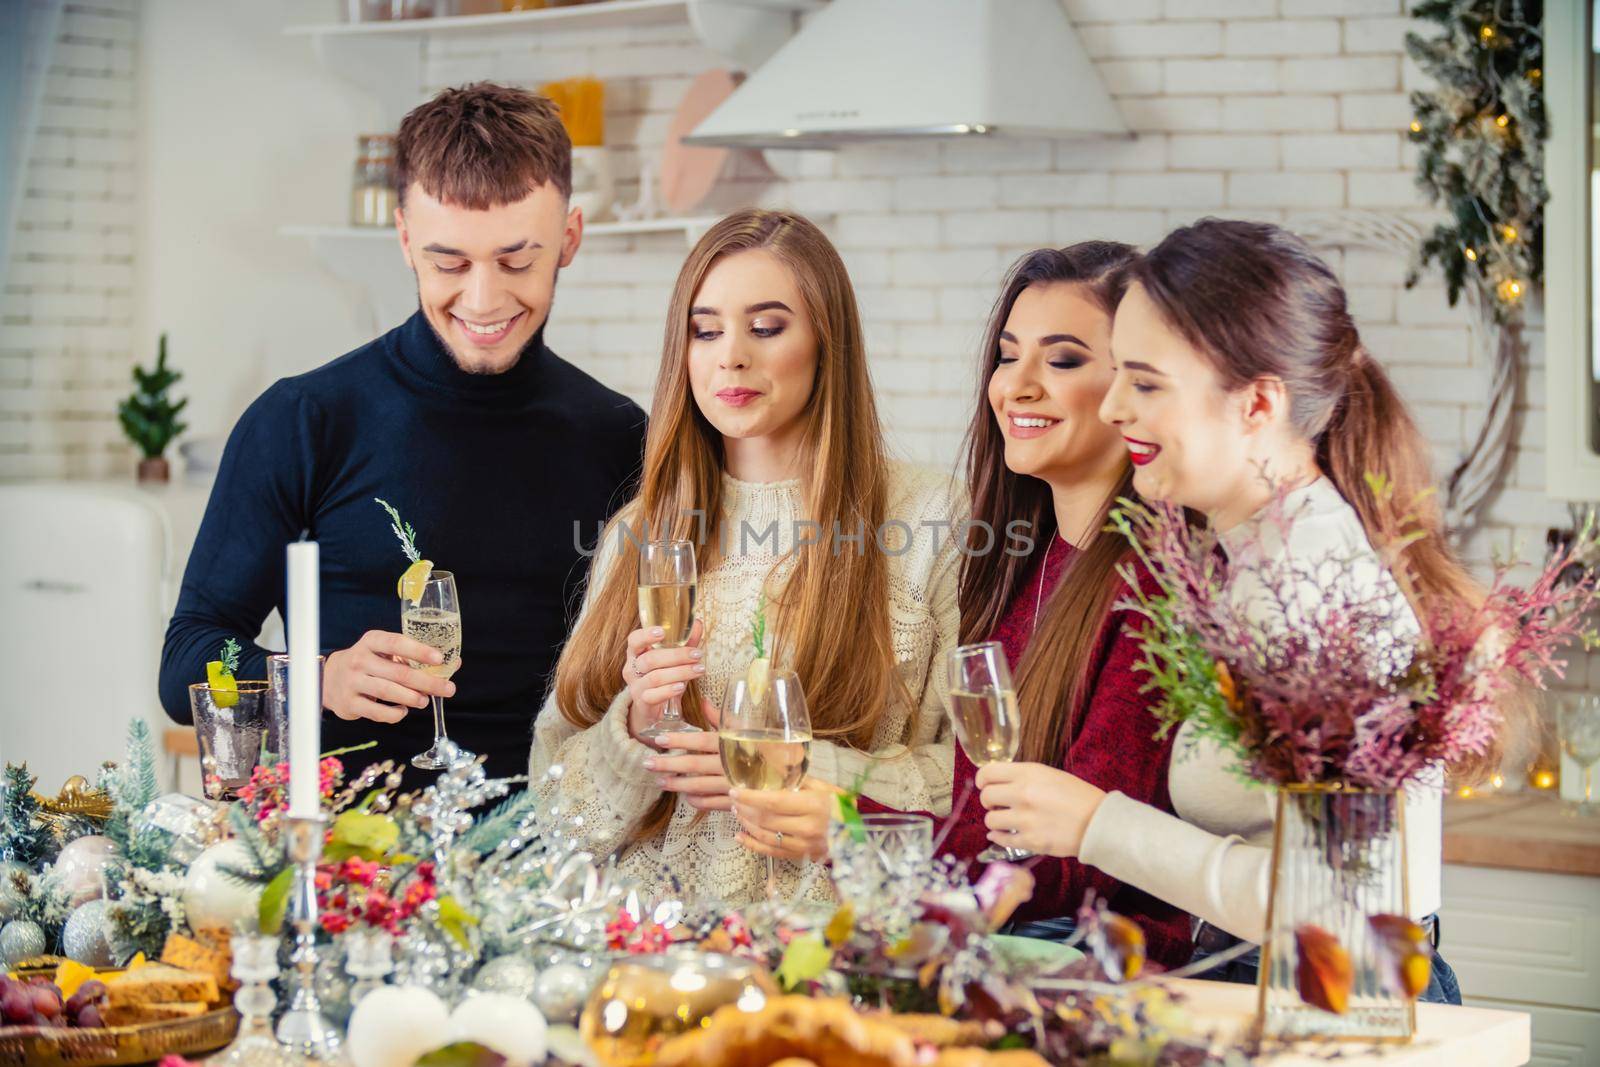 guy with girls drinking champagne standing at the table